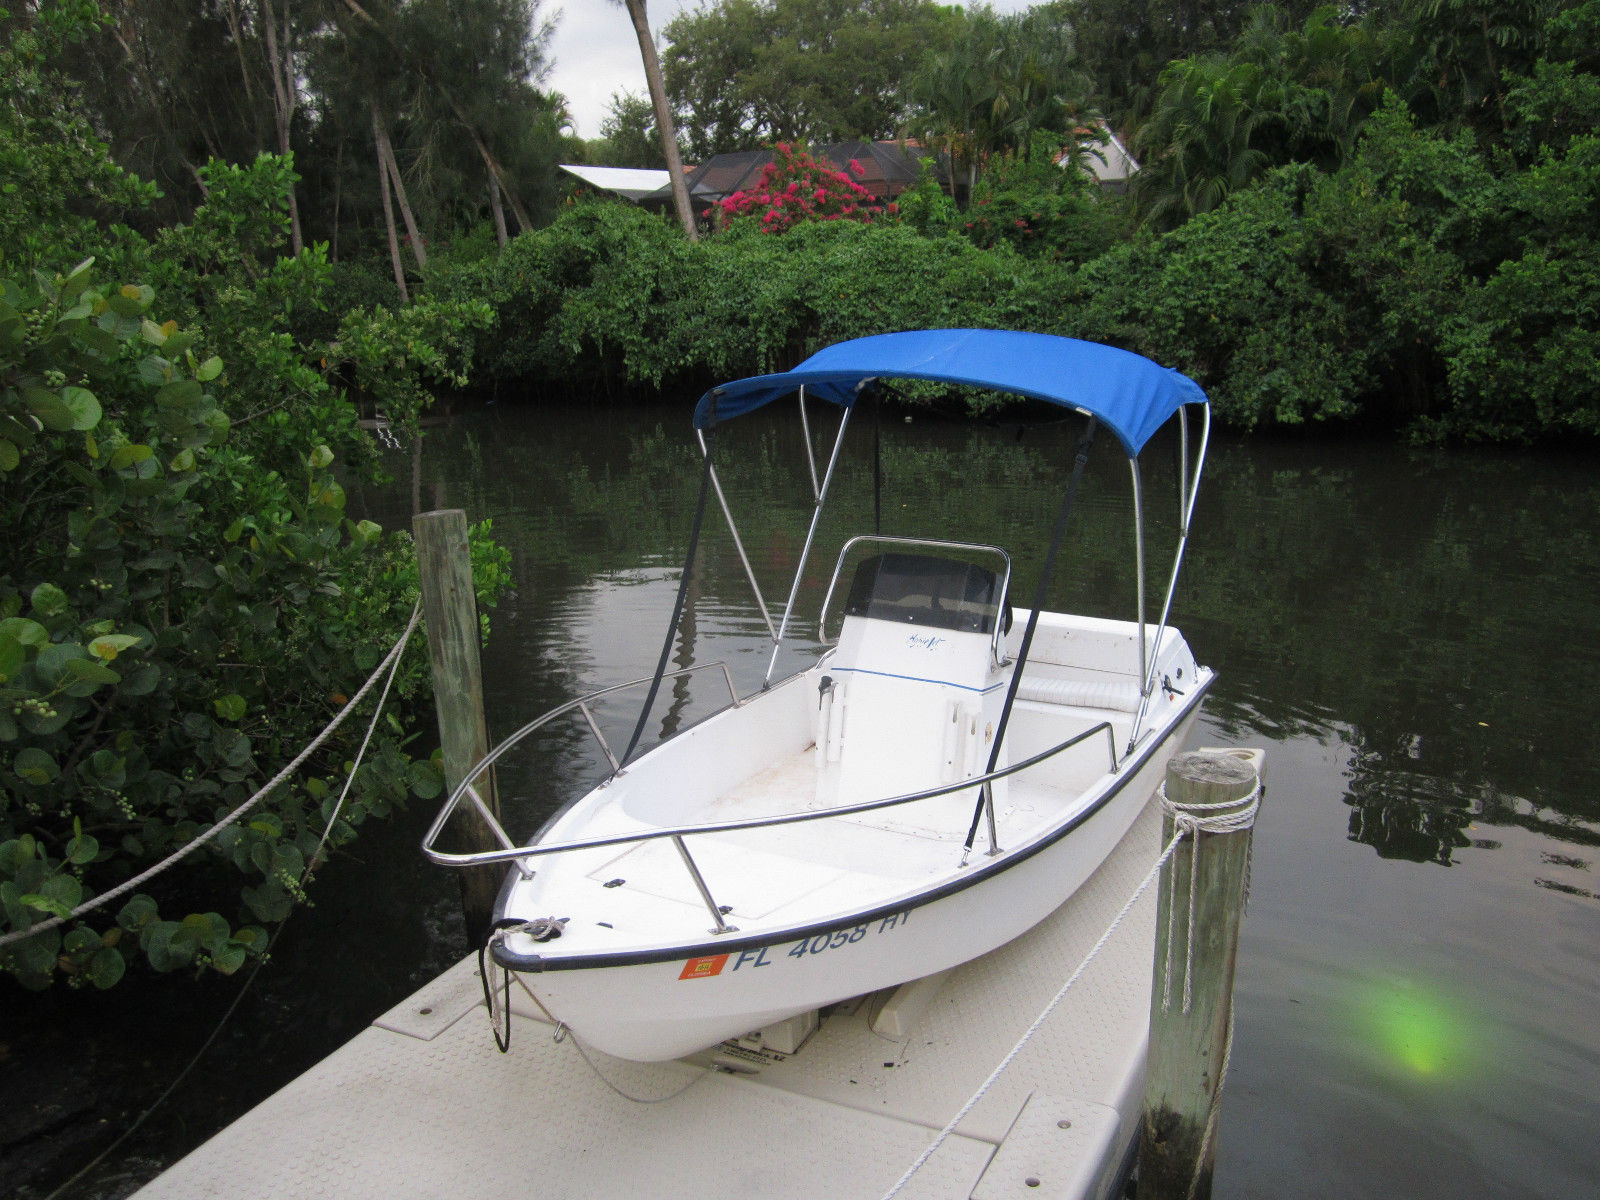 hobie cat jet boat 1995 for sale for ,750 - boats-from